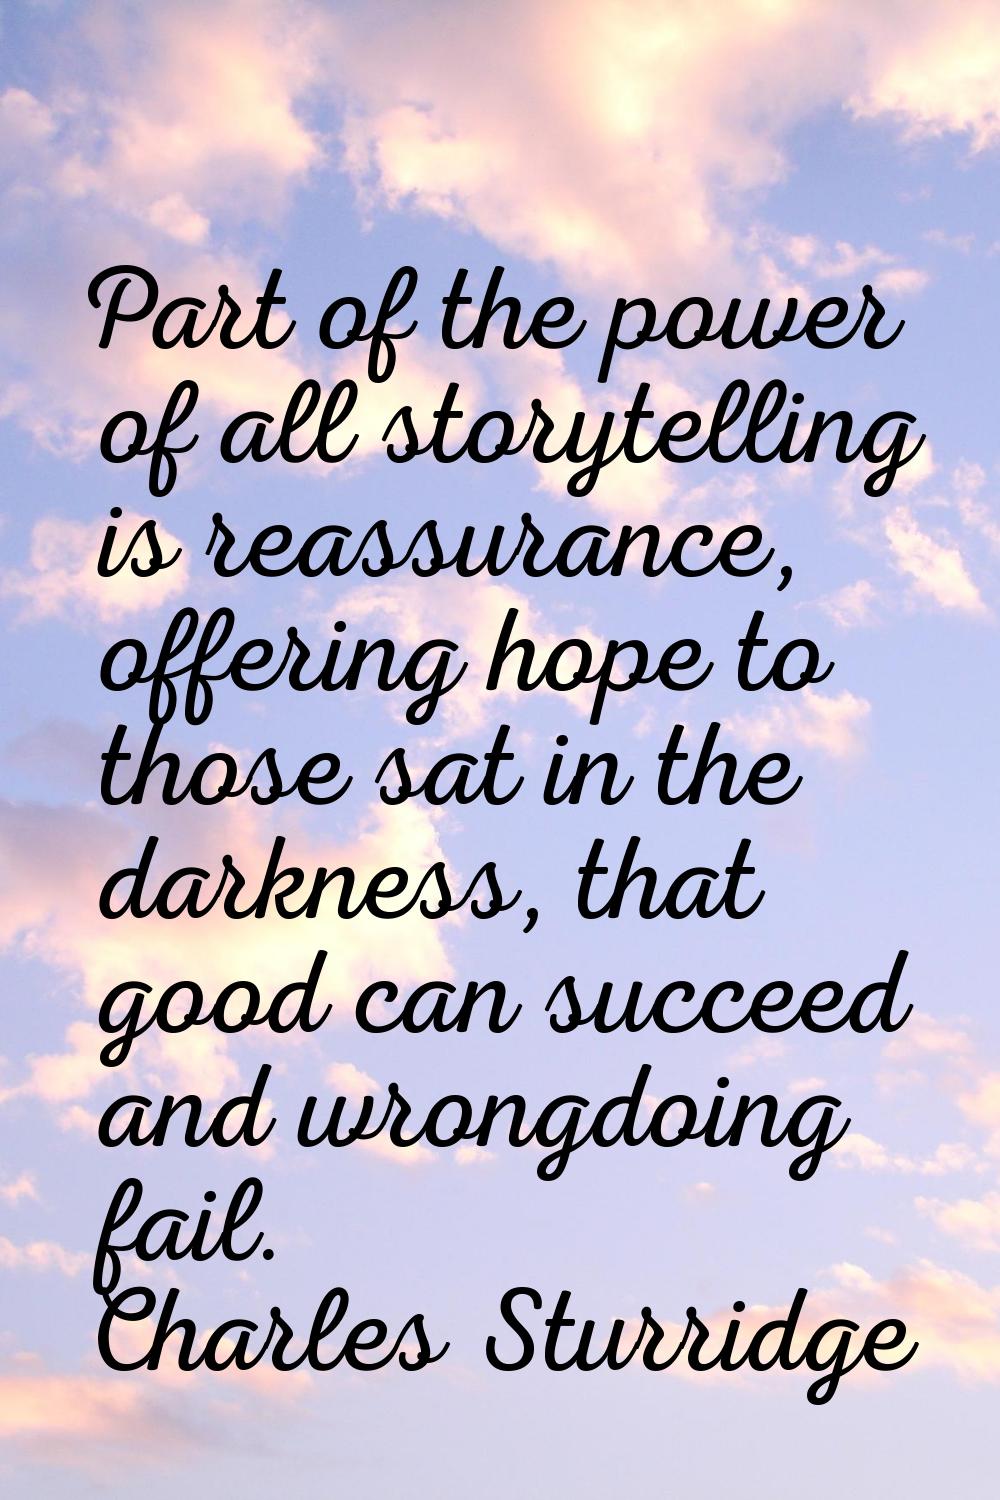 Part of the power of all storytelling is reassurance, offering hope to those sat in the darkness, t